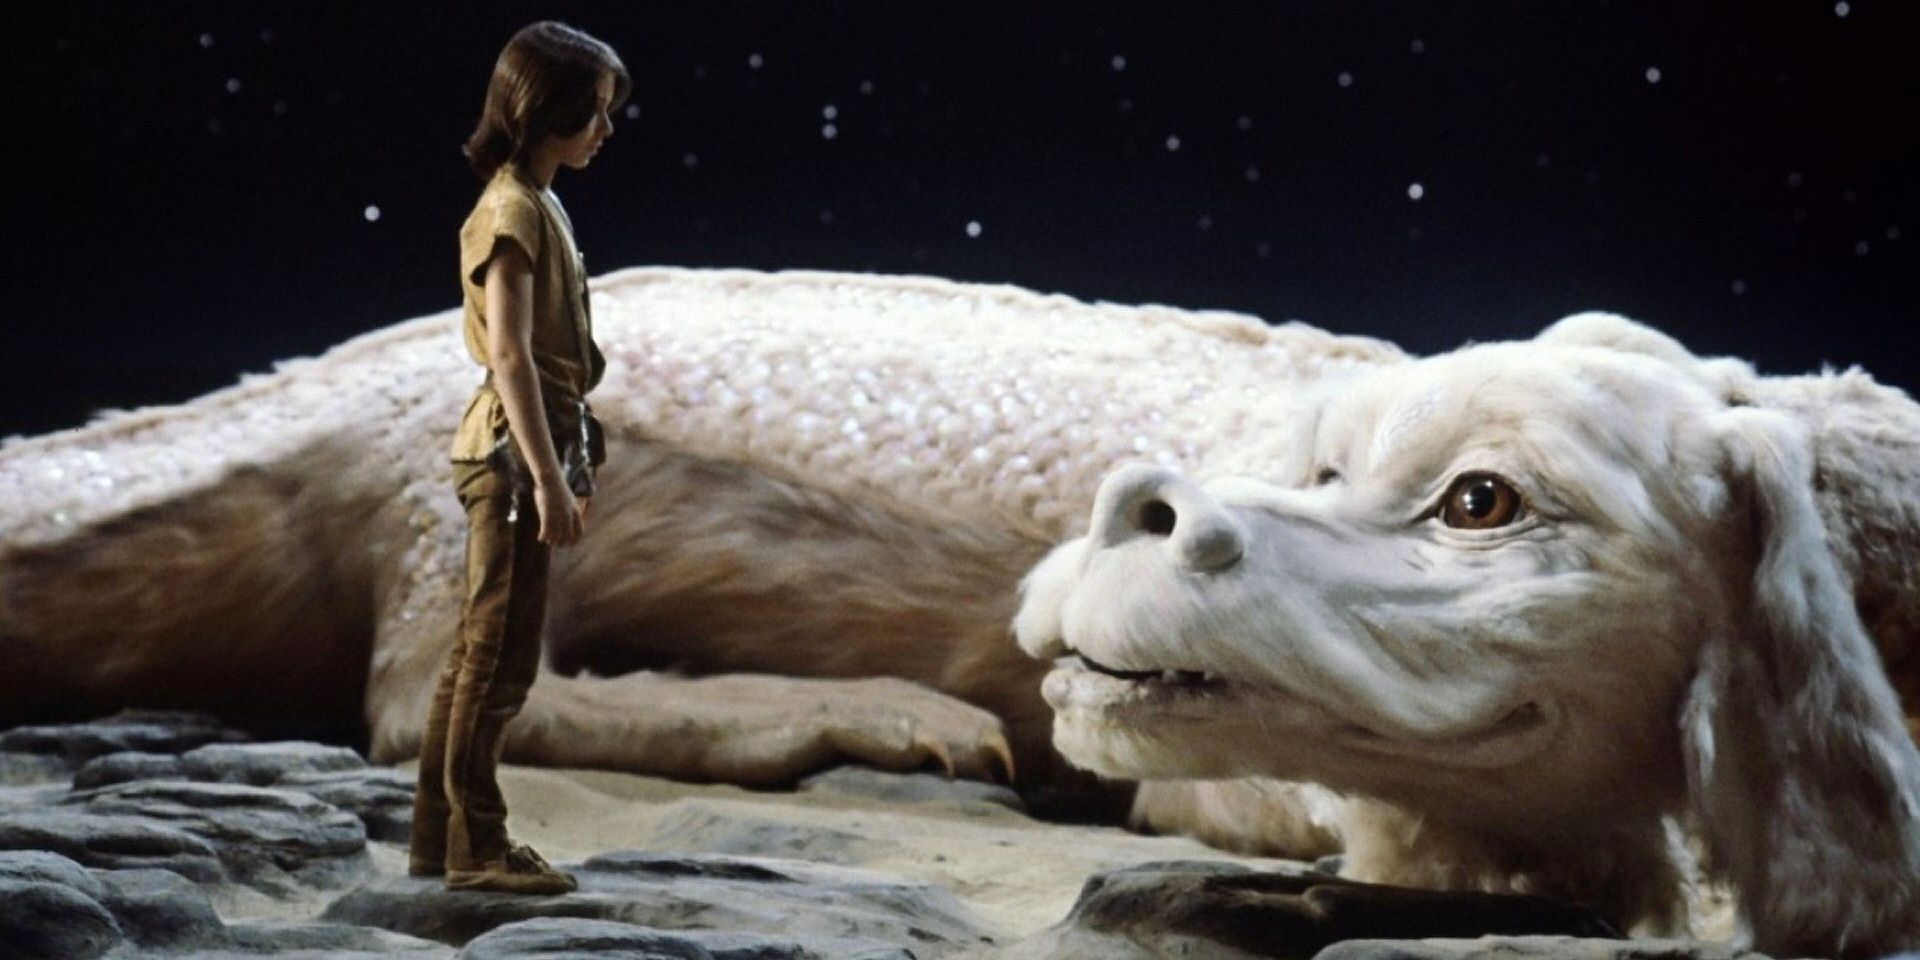 A still from The NeverEnding Story 